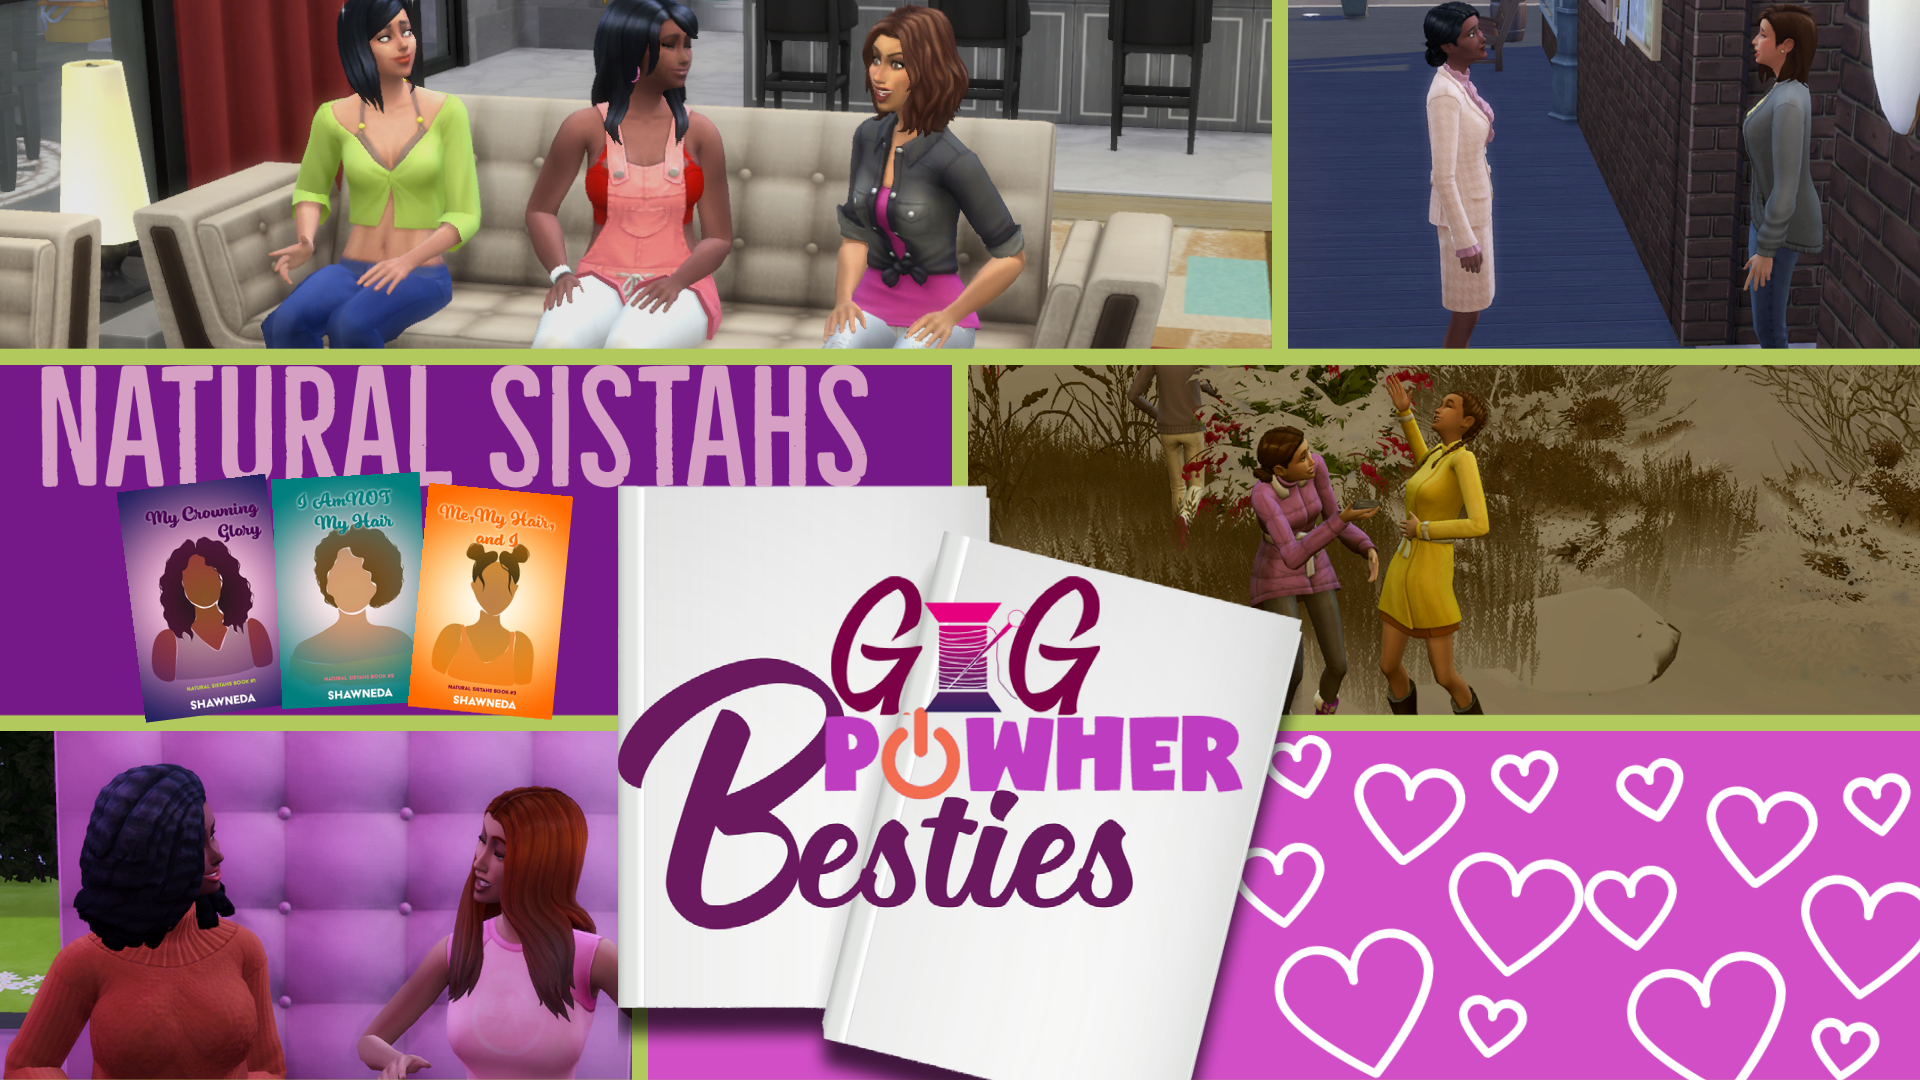 Transition Screen for Natural Sistahs PowHer Besties series